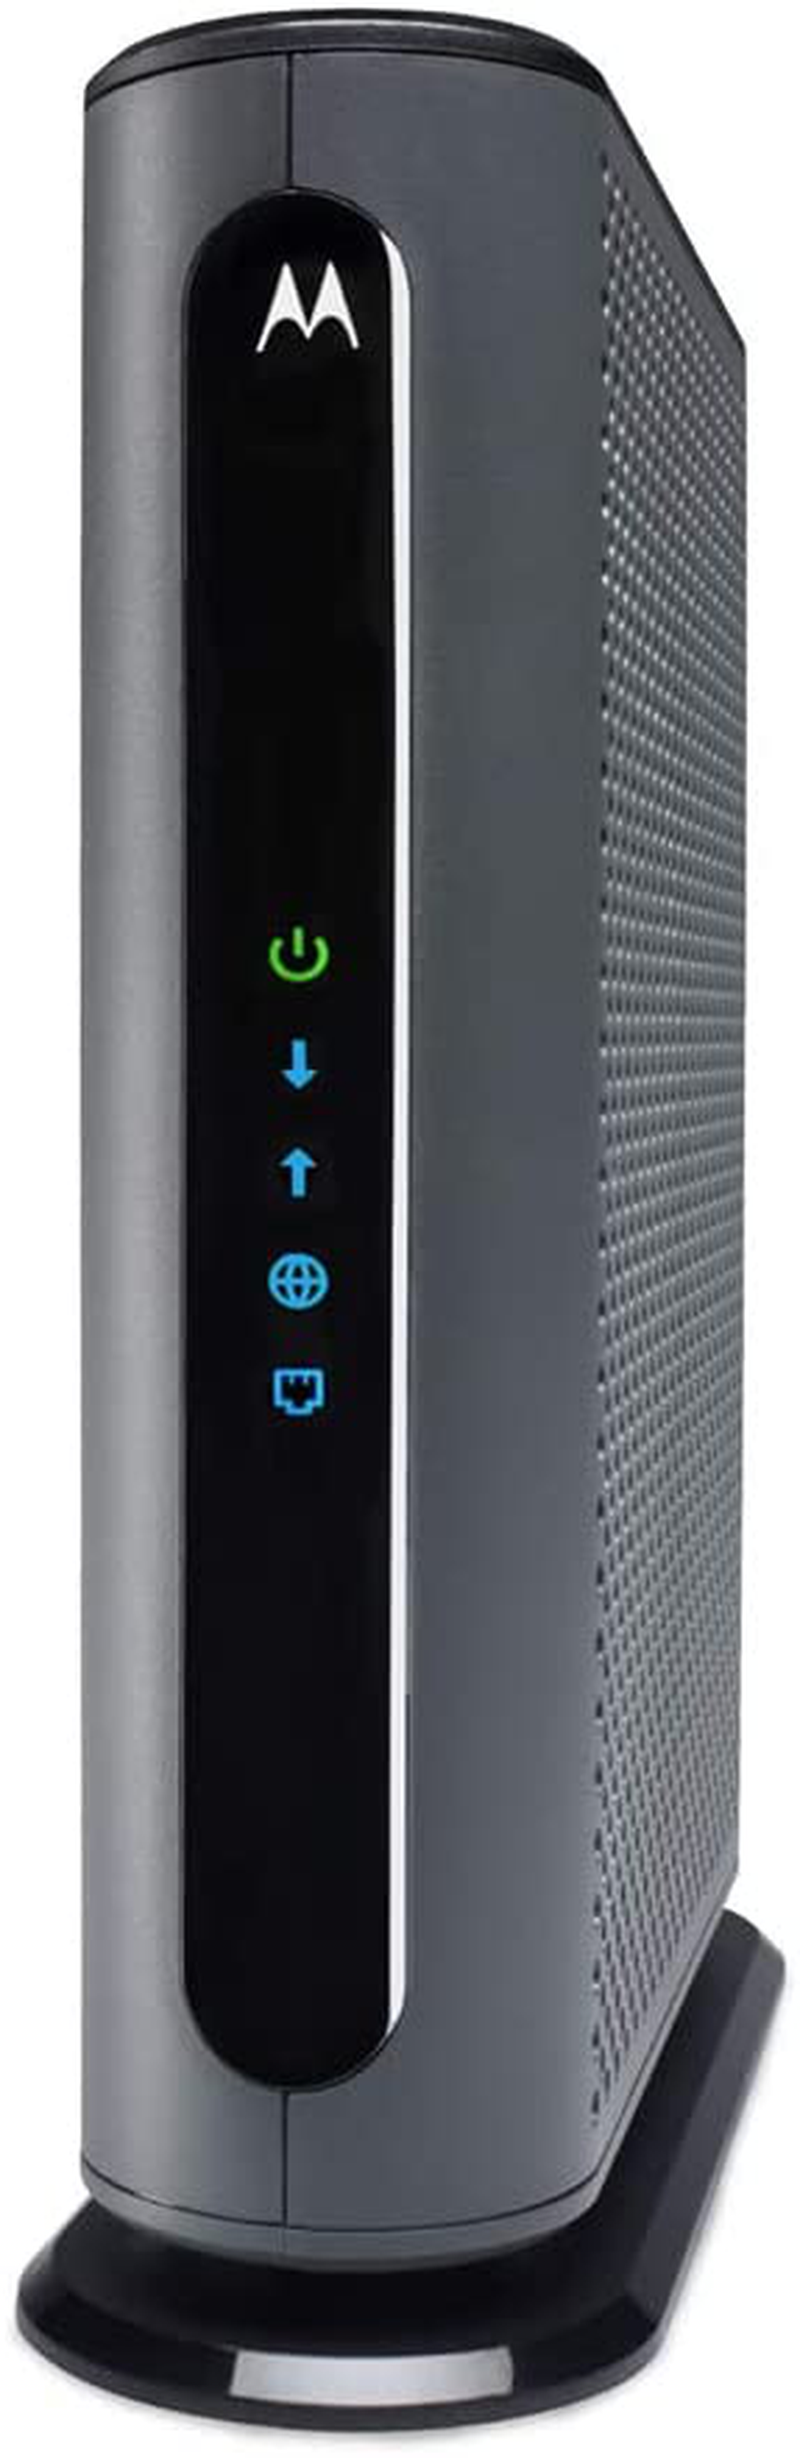 Motorola MB8600 DOCSIS 3.1 Cable Modem, 6 Gbps Max Speed. Approved for Comcast Xfinity Gigabit, Cox Gigablast, and More, Black Electronics > Networking > Modems MTRLC LLC DOCSIS 3.1 (2.5 Gbps Ethernet Port)  